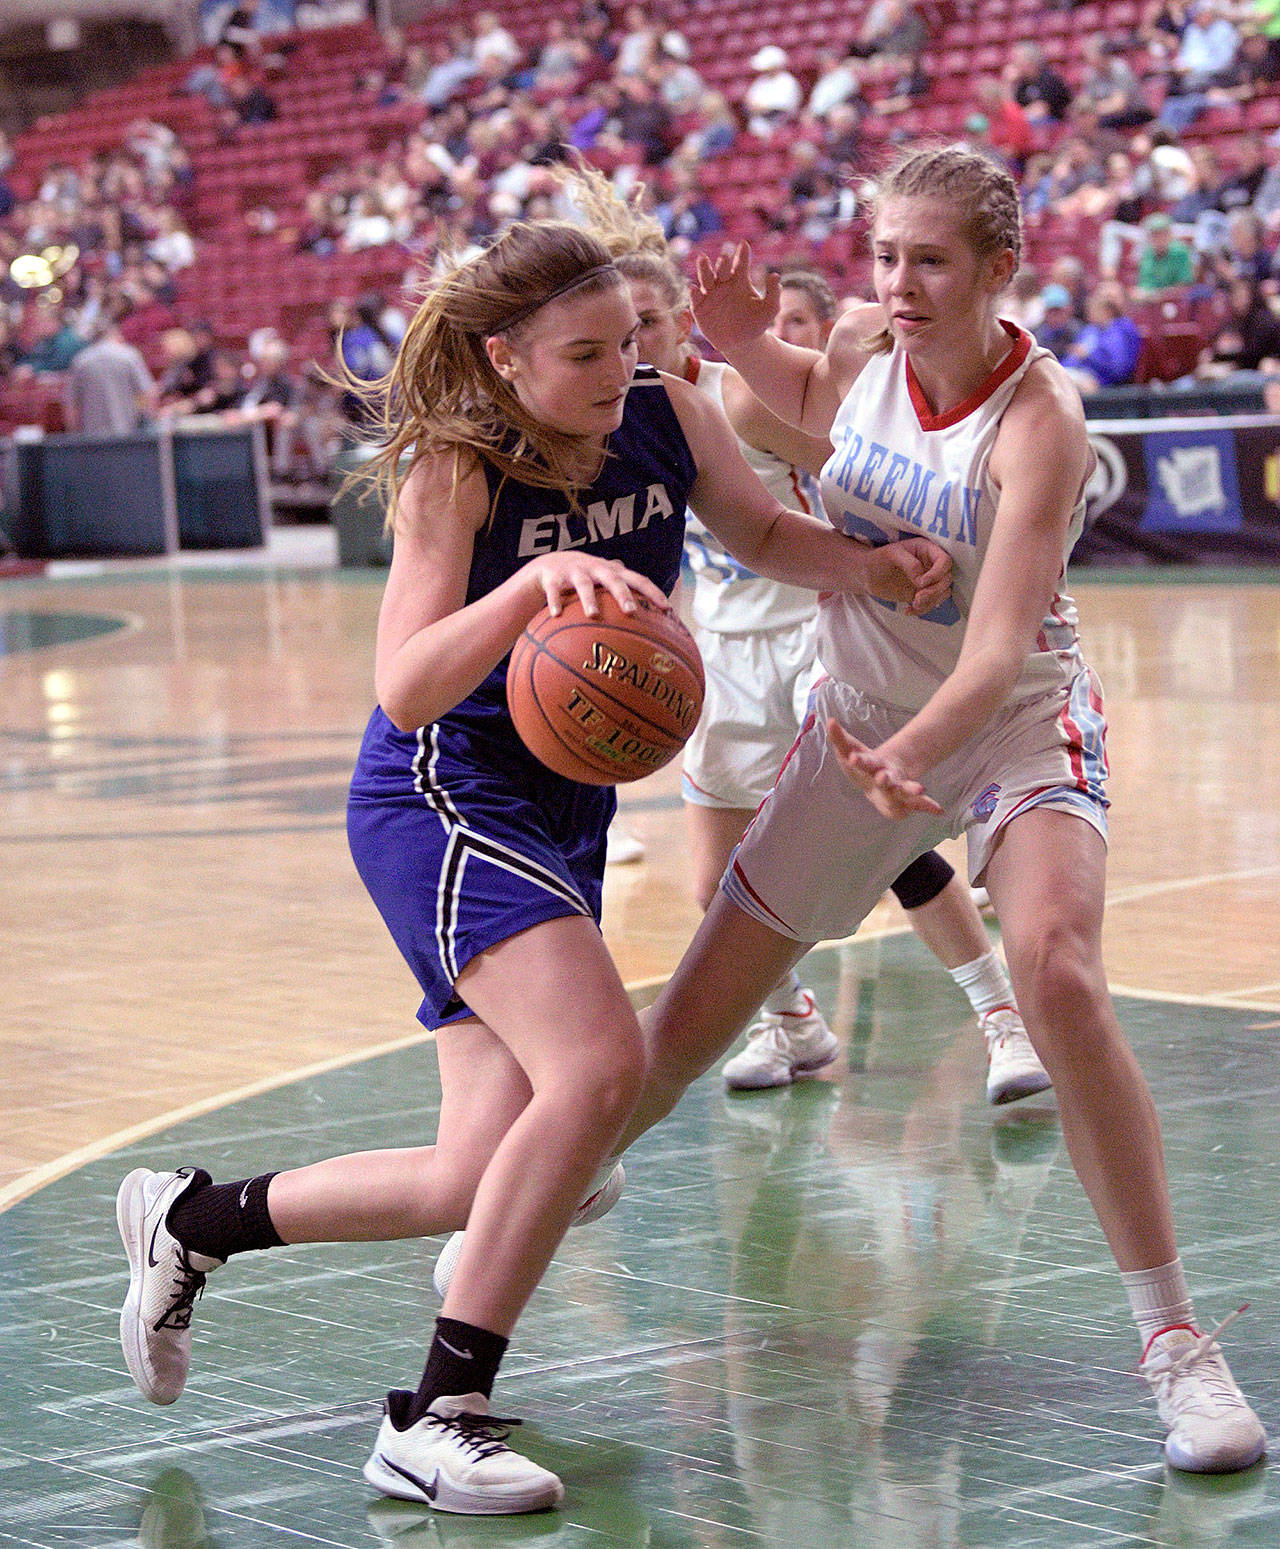 Elma’s Jalyn Sackrider, left, dribbles against Freeman’s Jaycee Goldsmith during the Eagles 49-25 loss in the 1A State Tournament on Wednesday at the SunDome in Yakima. (Photo by CJ Mudgett)